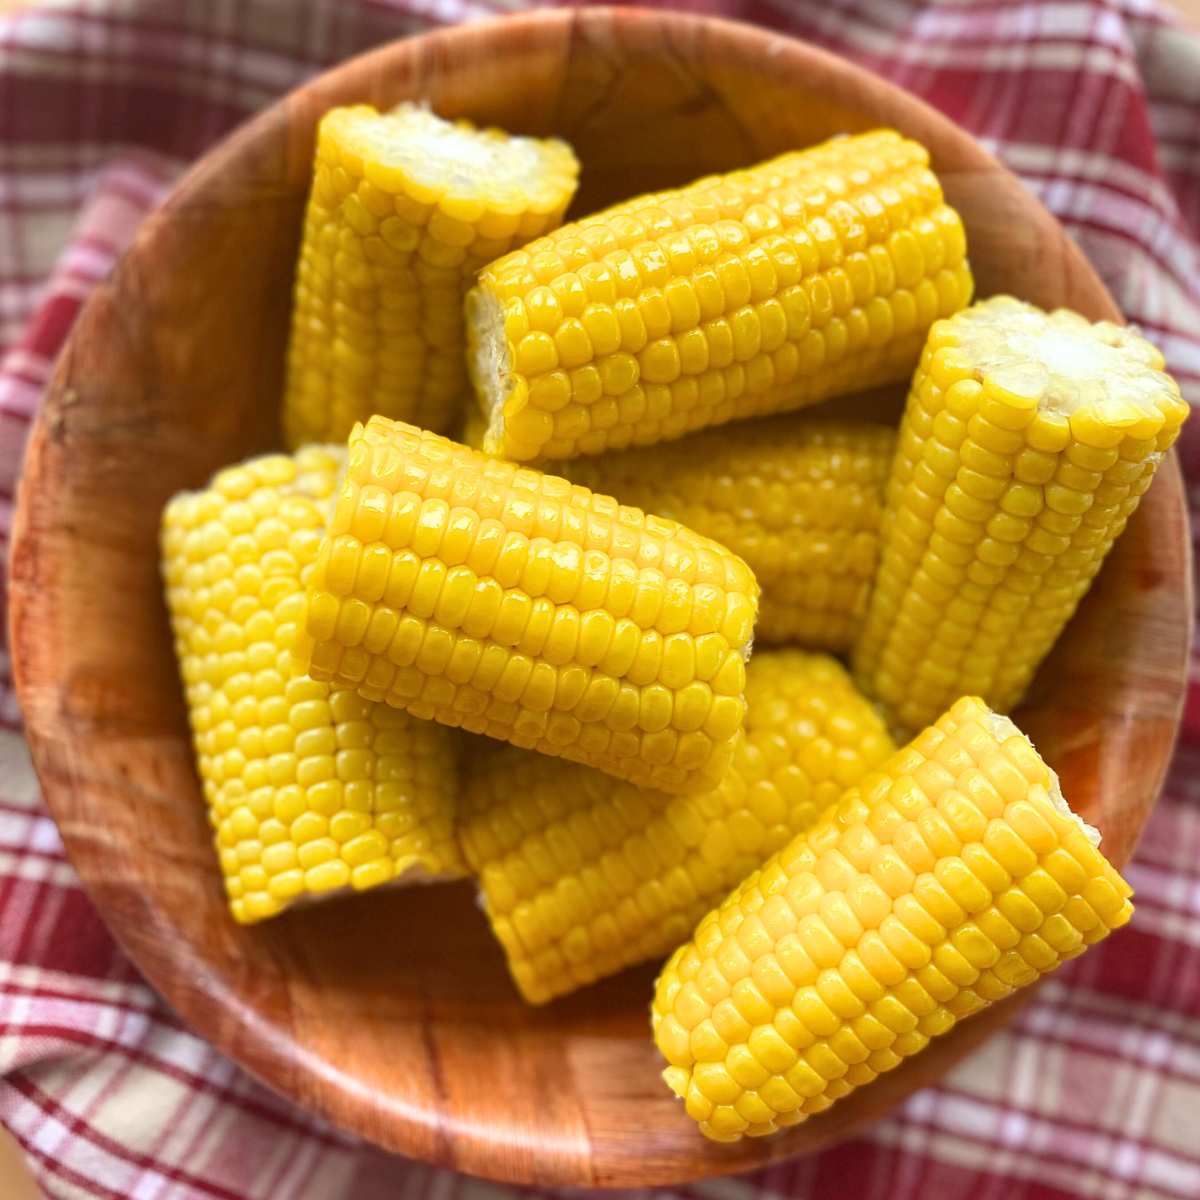 Bowl with 4 inch segments of corn on the cob.